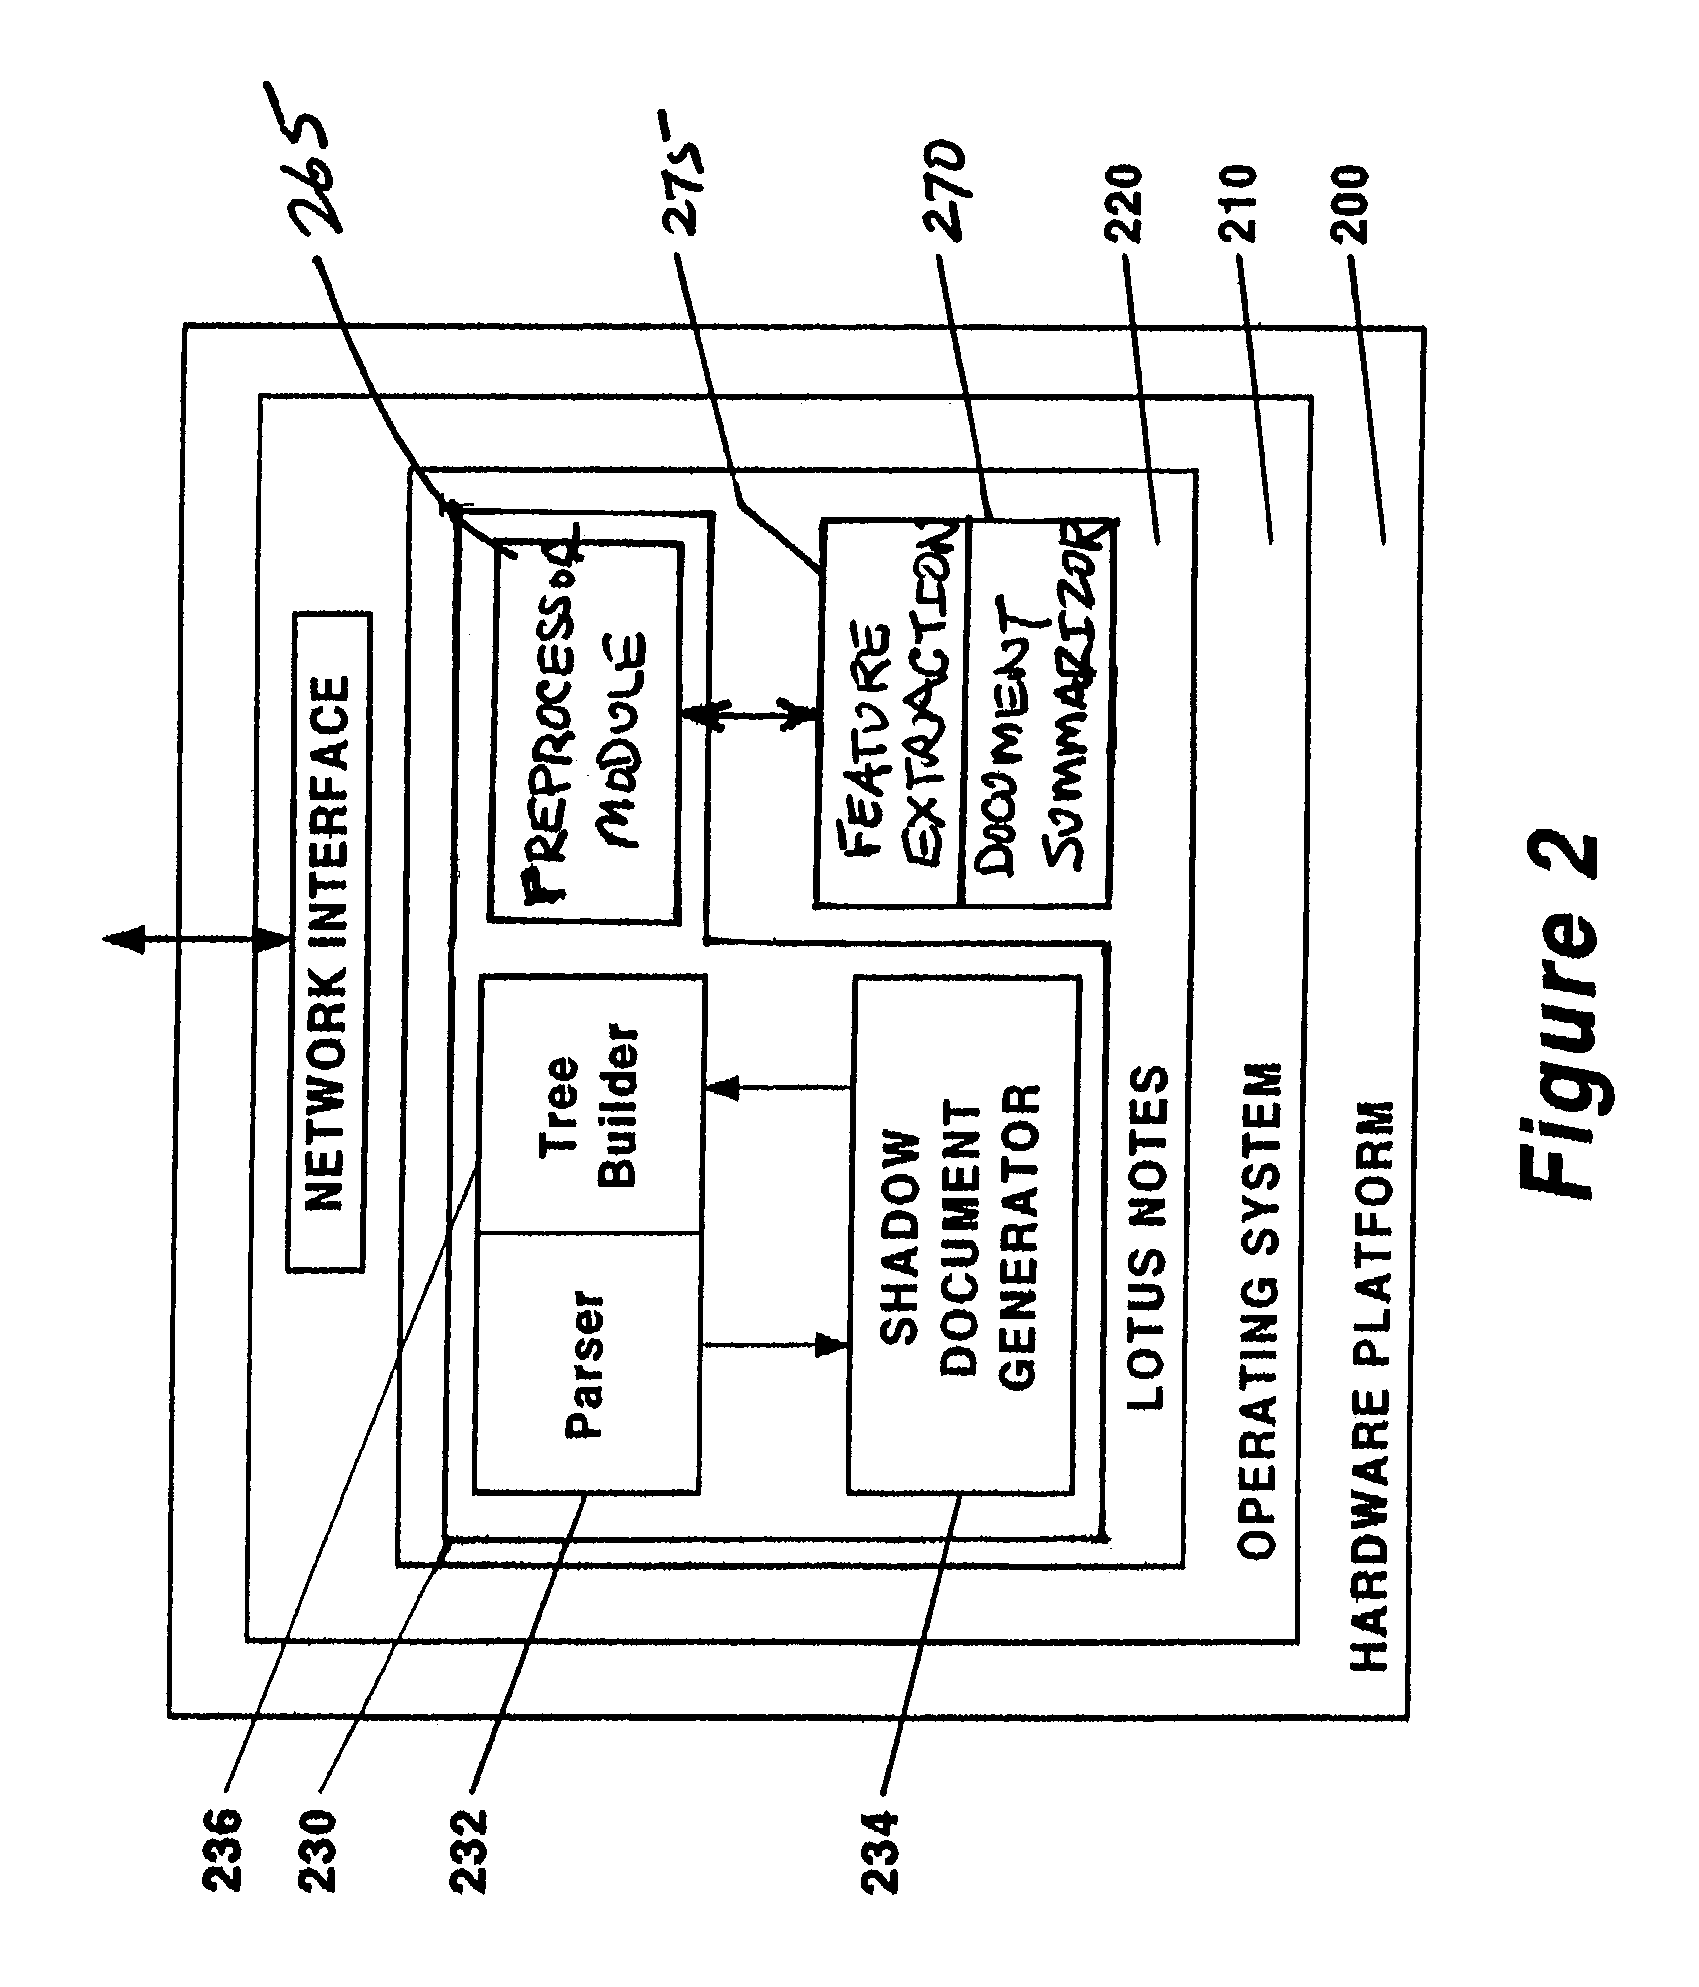 Method for summarization of threads in electronic mail